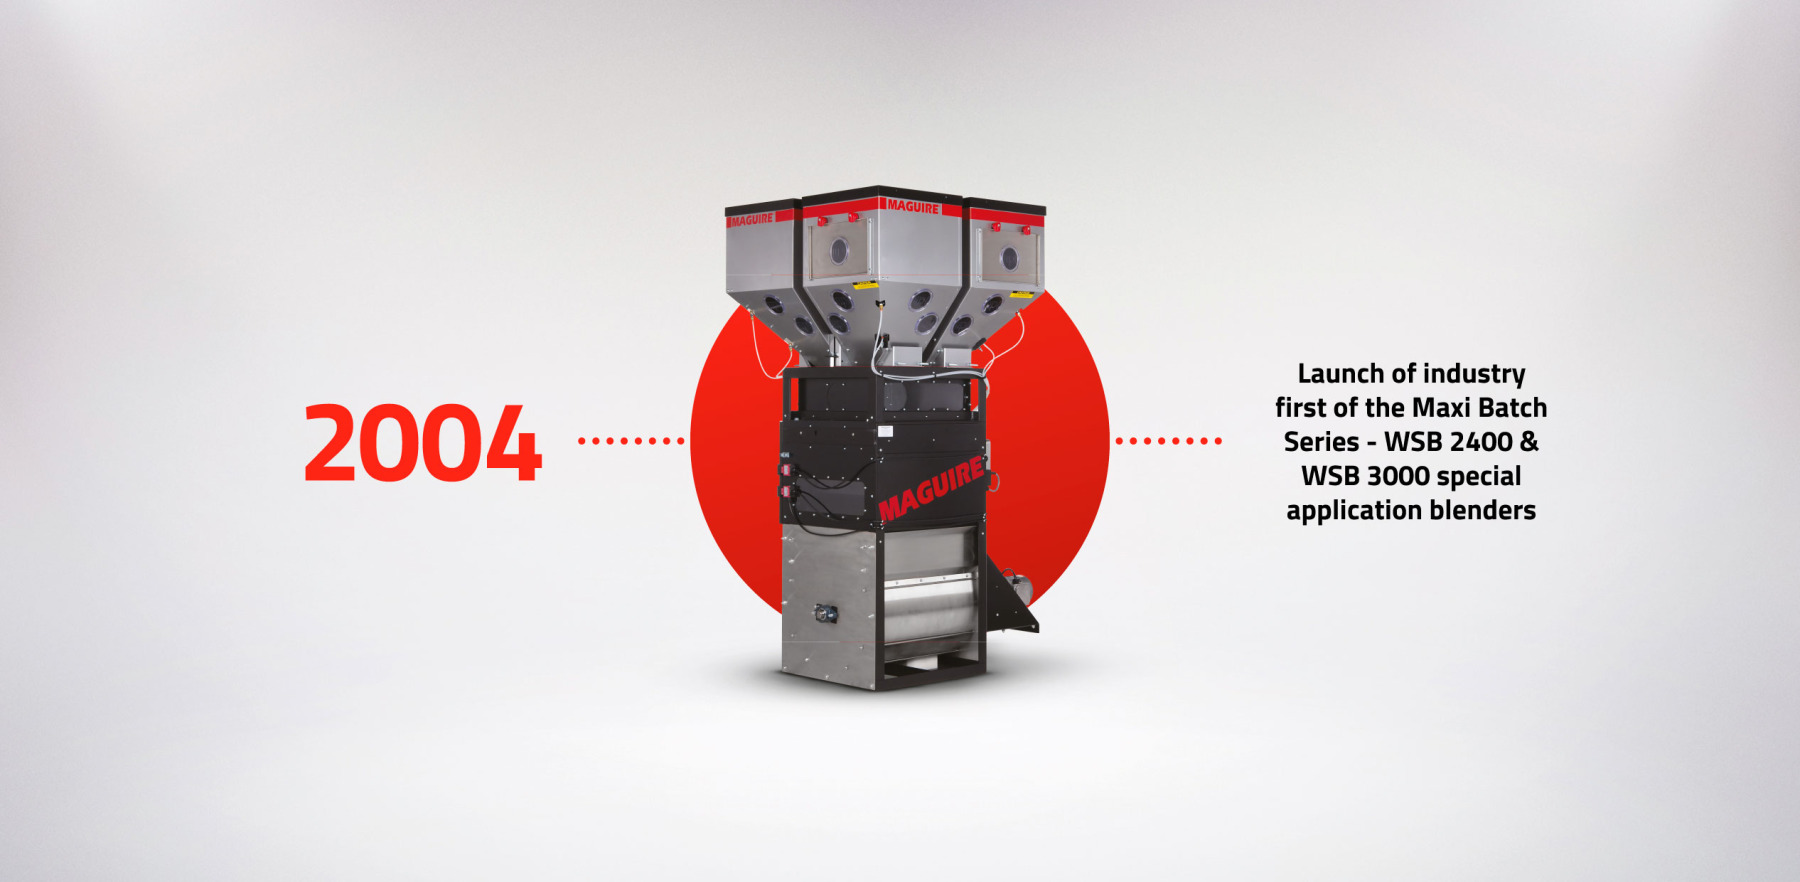 Launch of industry first of the Maxi Batch Series - WSB 2400 & WSB 3000 special application blenders